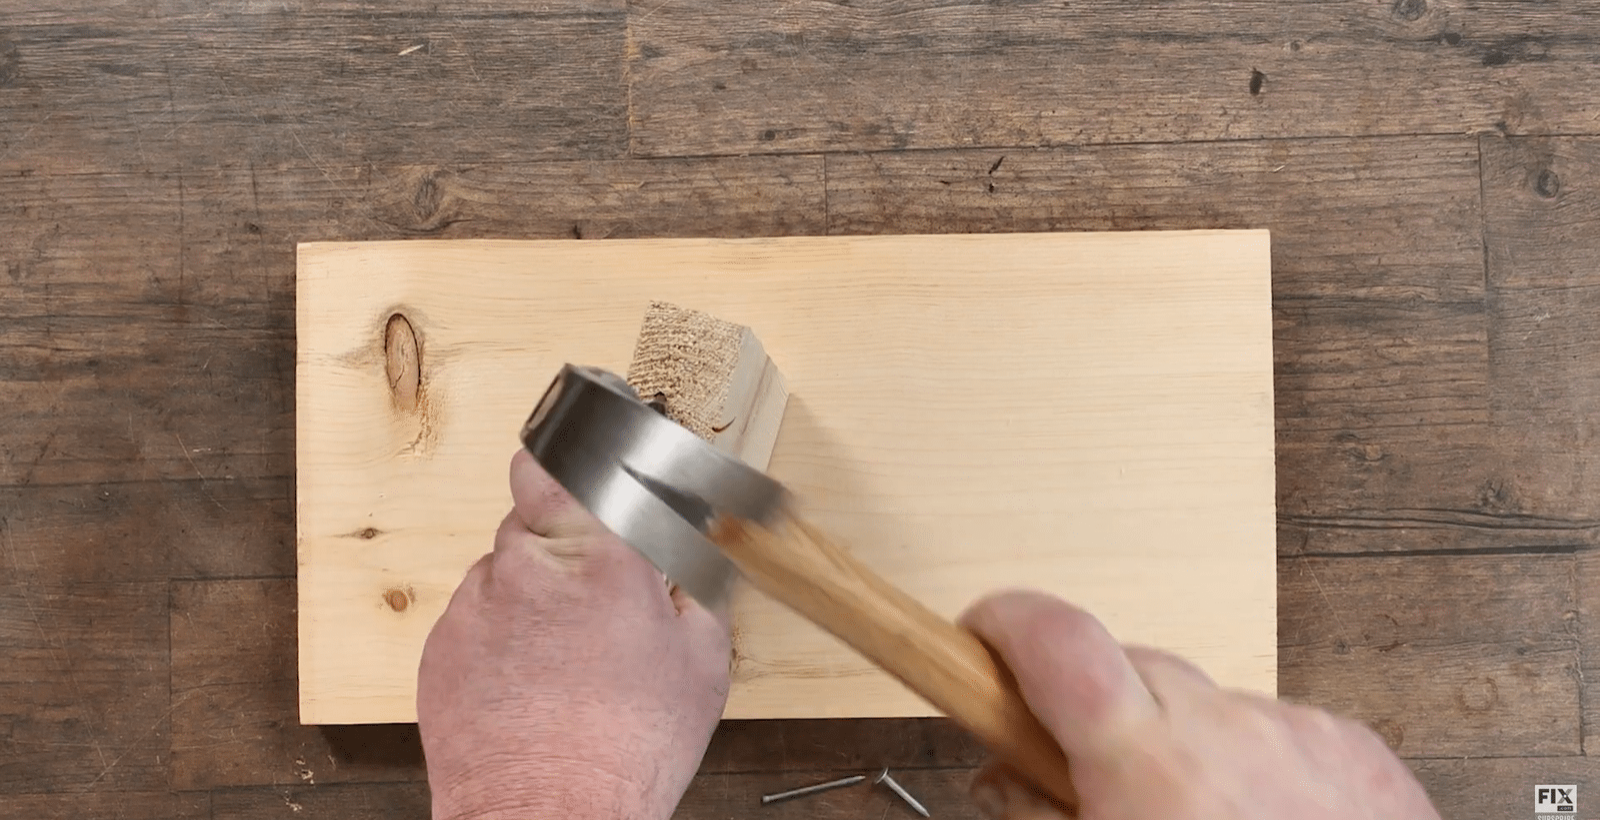 Hammering a Nail into the side of a Wooden Block